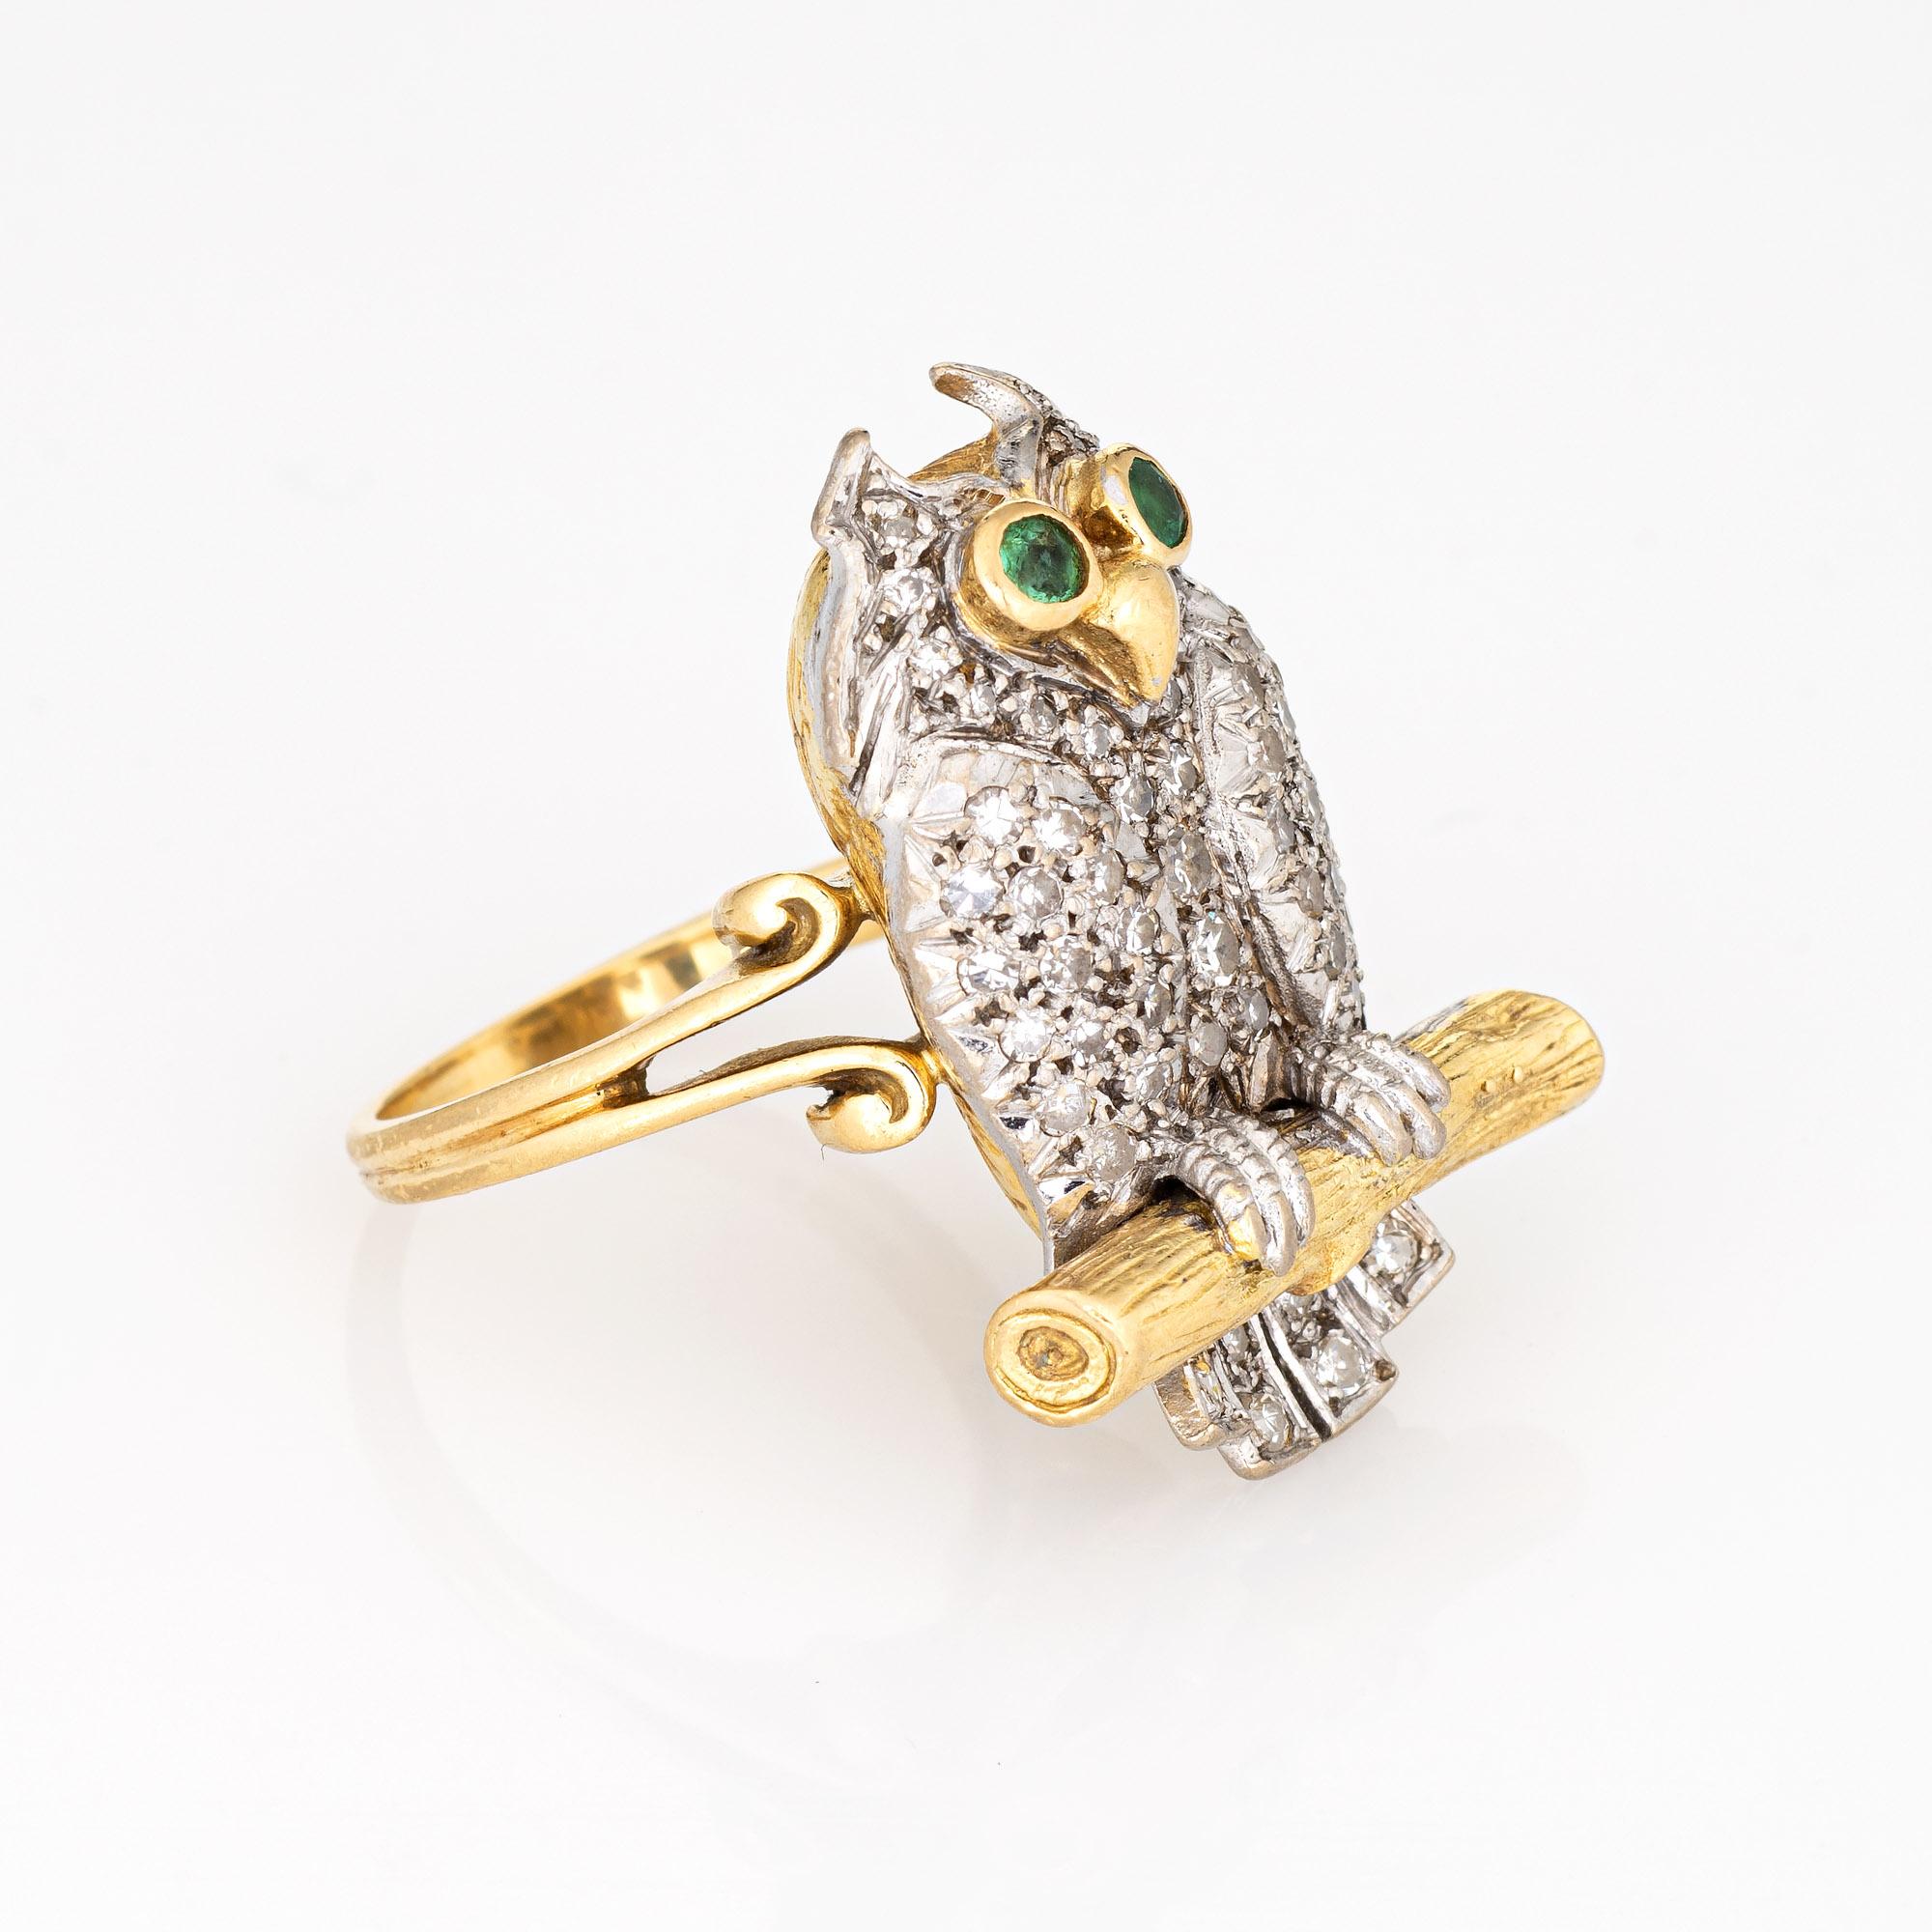 Distinct owl ring set with diamonds and green emerald eyes, crafted in 18 karat yellow gold (circa 1975). 

Single cut diamonds total an estimated 0.85 carats (estimated at H-I color and VS2-SI2 clarity). Two emeralds total an estimated 0.04 carats.